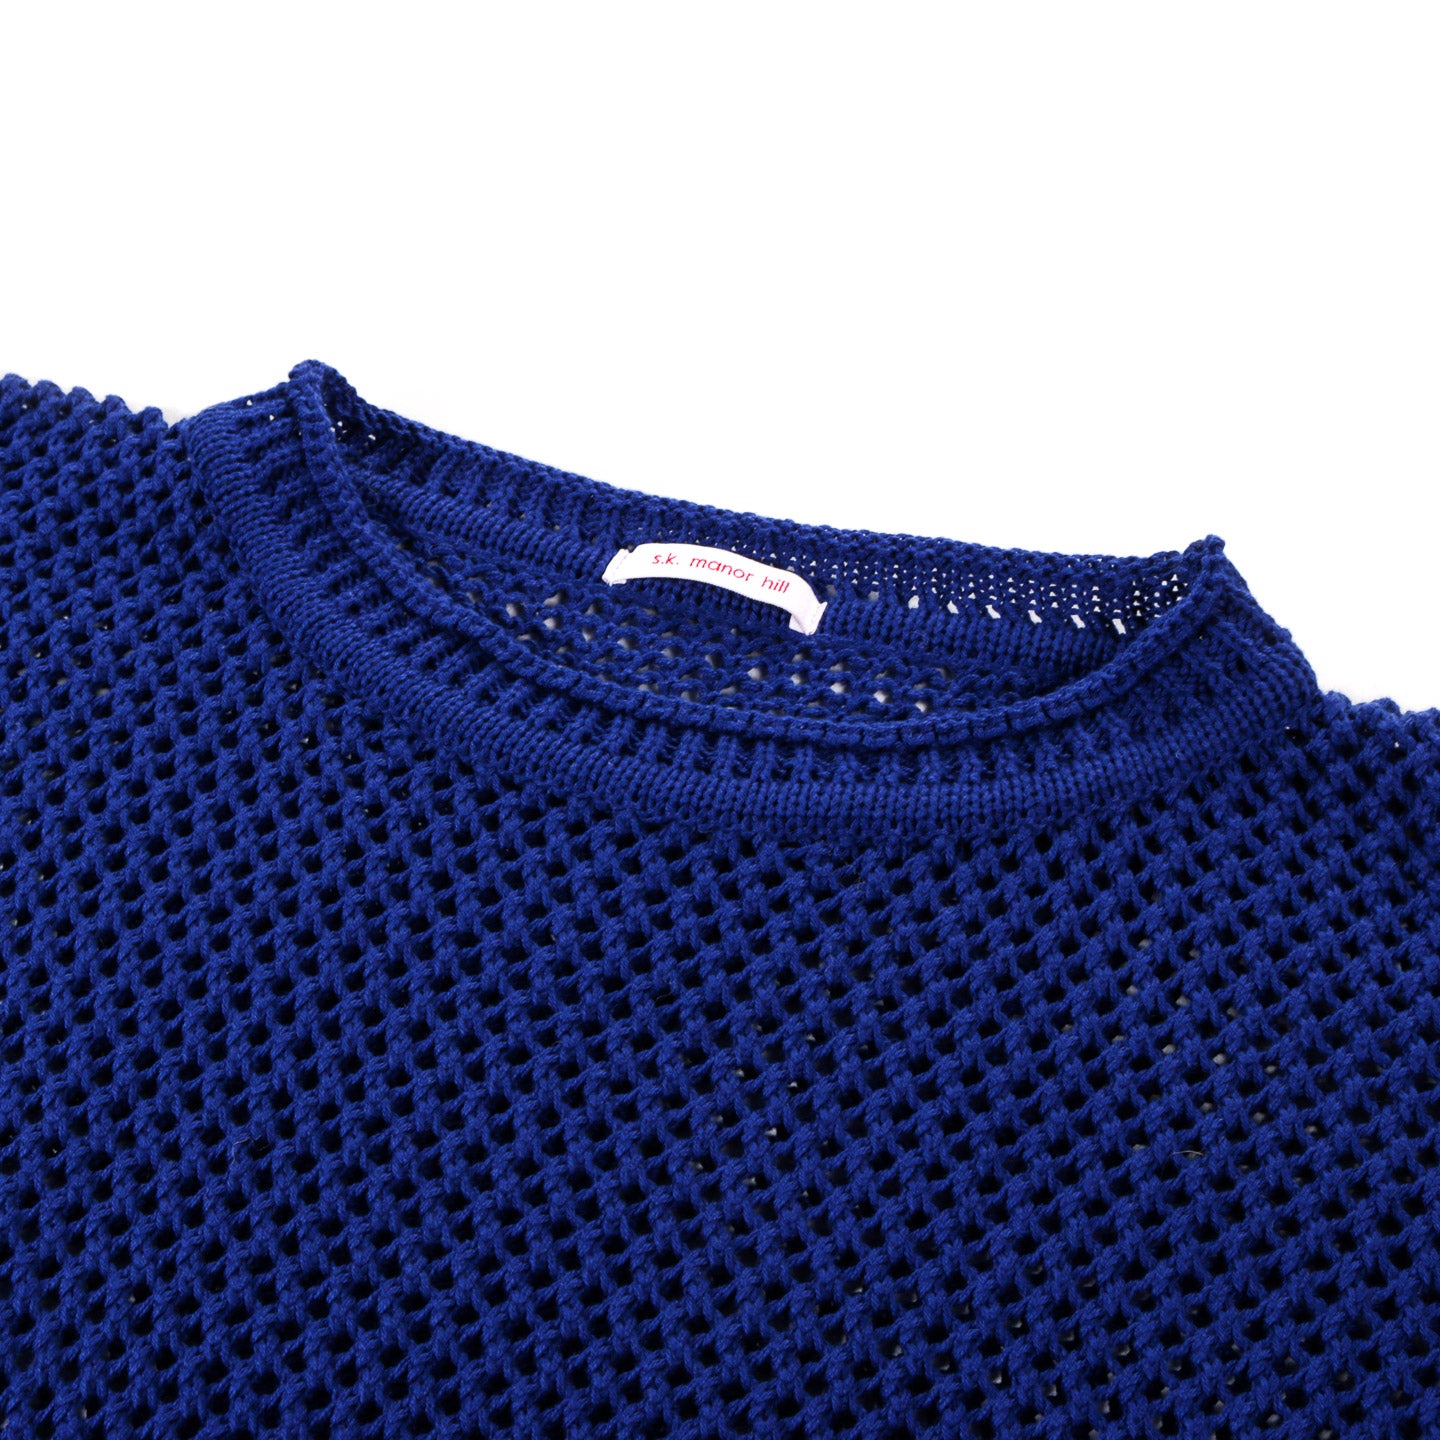 S.K. MANOR HILL OPEN KNIT SWEATER ROYAL BLUE COTTON